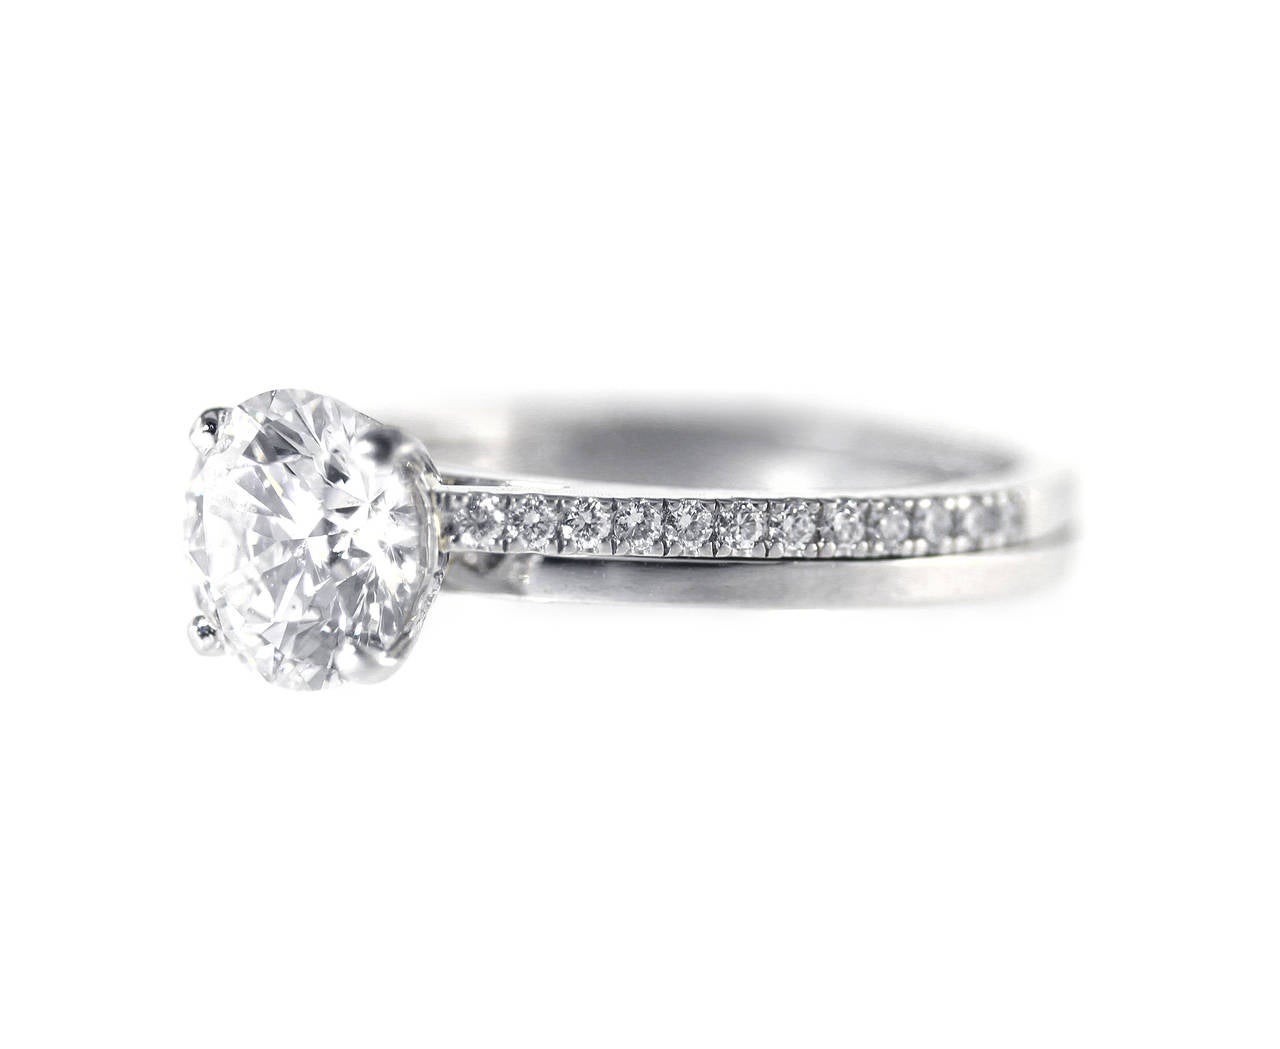 The ideal platinum and diamond engagement ring by DeBeers, set in the center with a round diamond weighing 1.06 carats, flanked by 33 round diamonds weighing approximately 0.15 carat, gross weight 5.0 grams, size 4 3/4, measuring 3/4 by 1/4 by 7/8